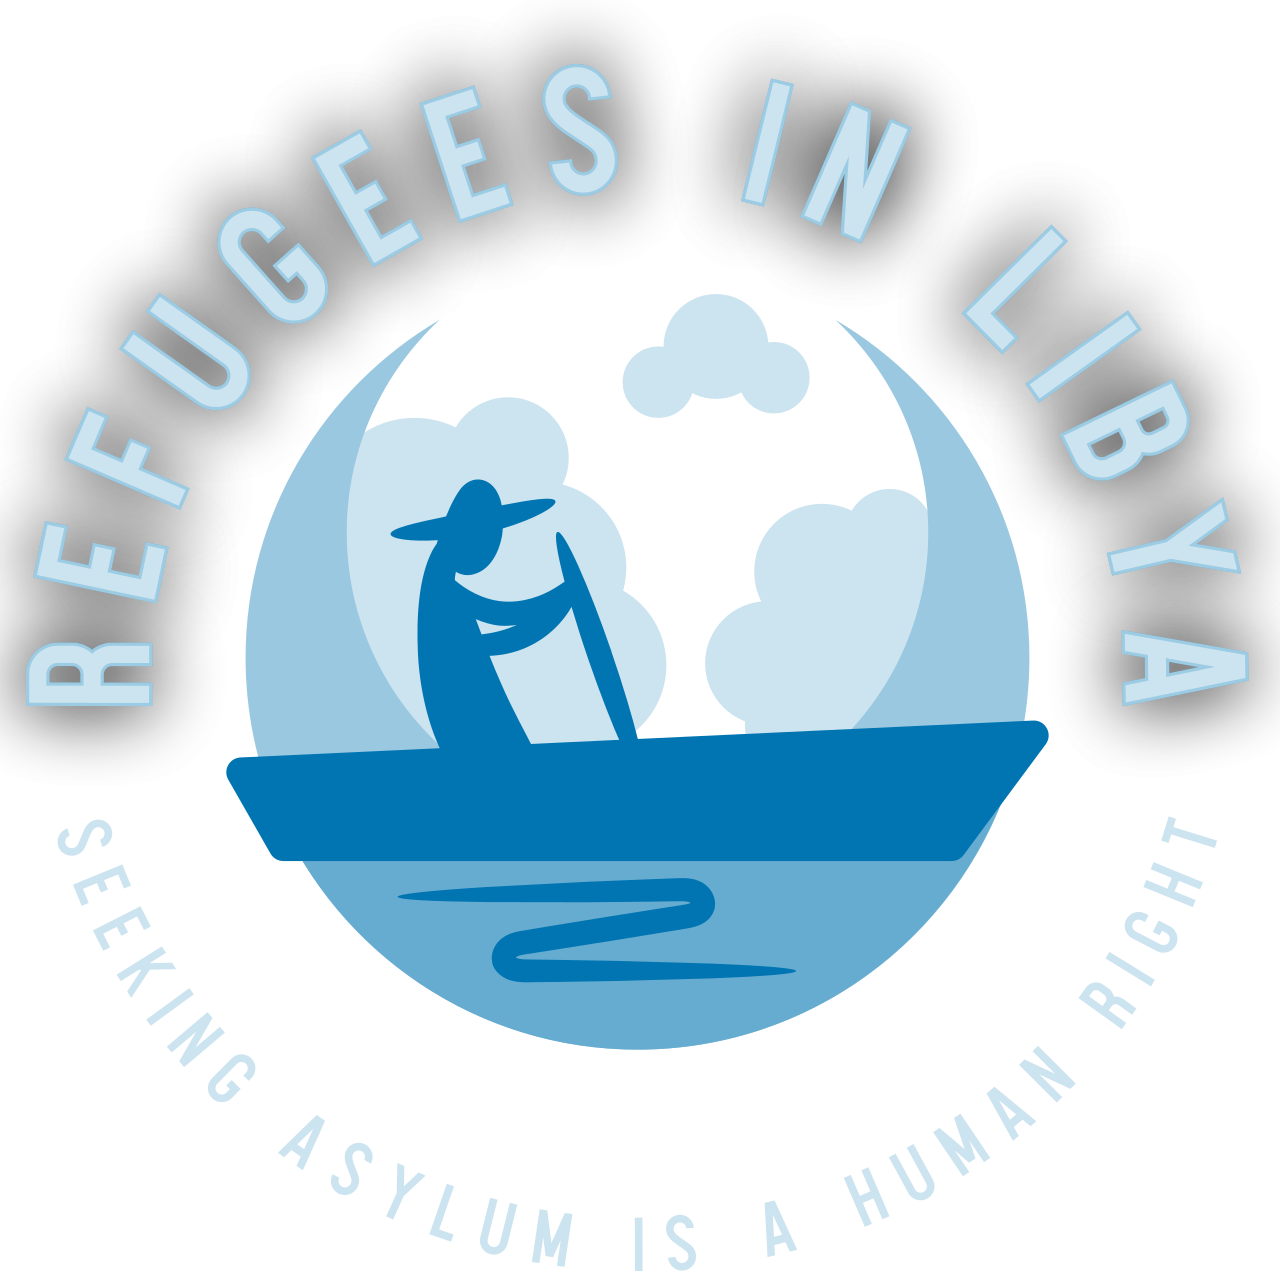 REFUGEES IN LIBYA's web page